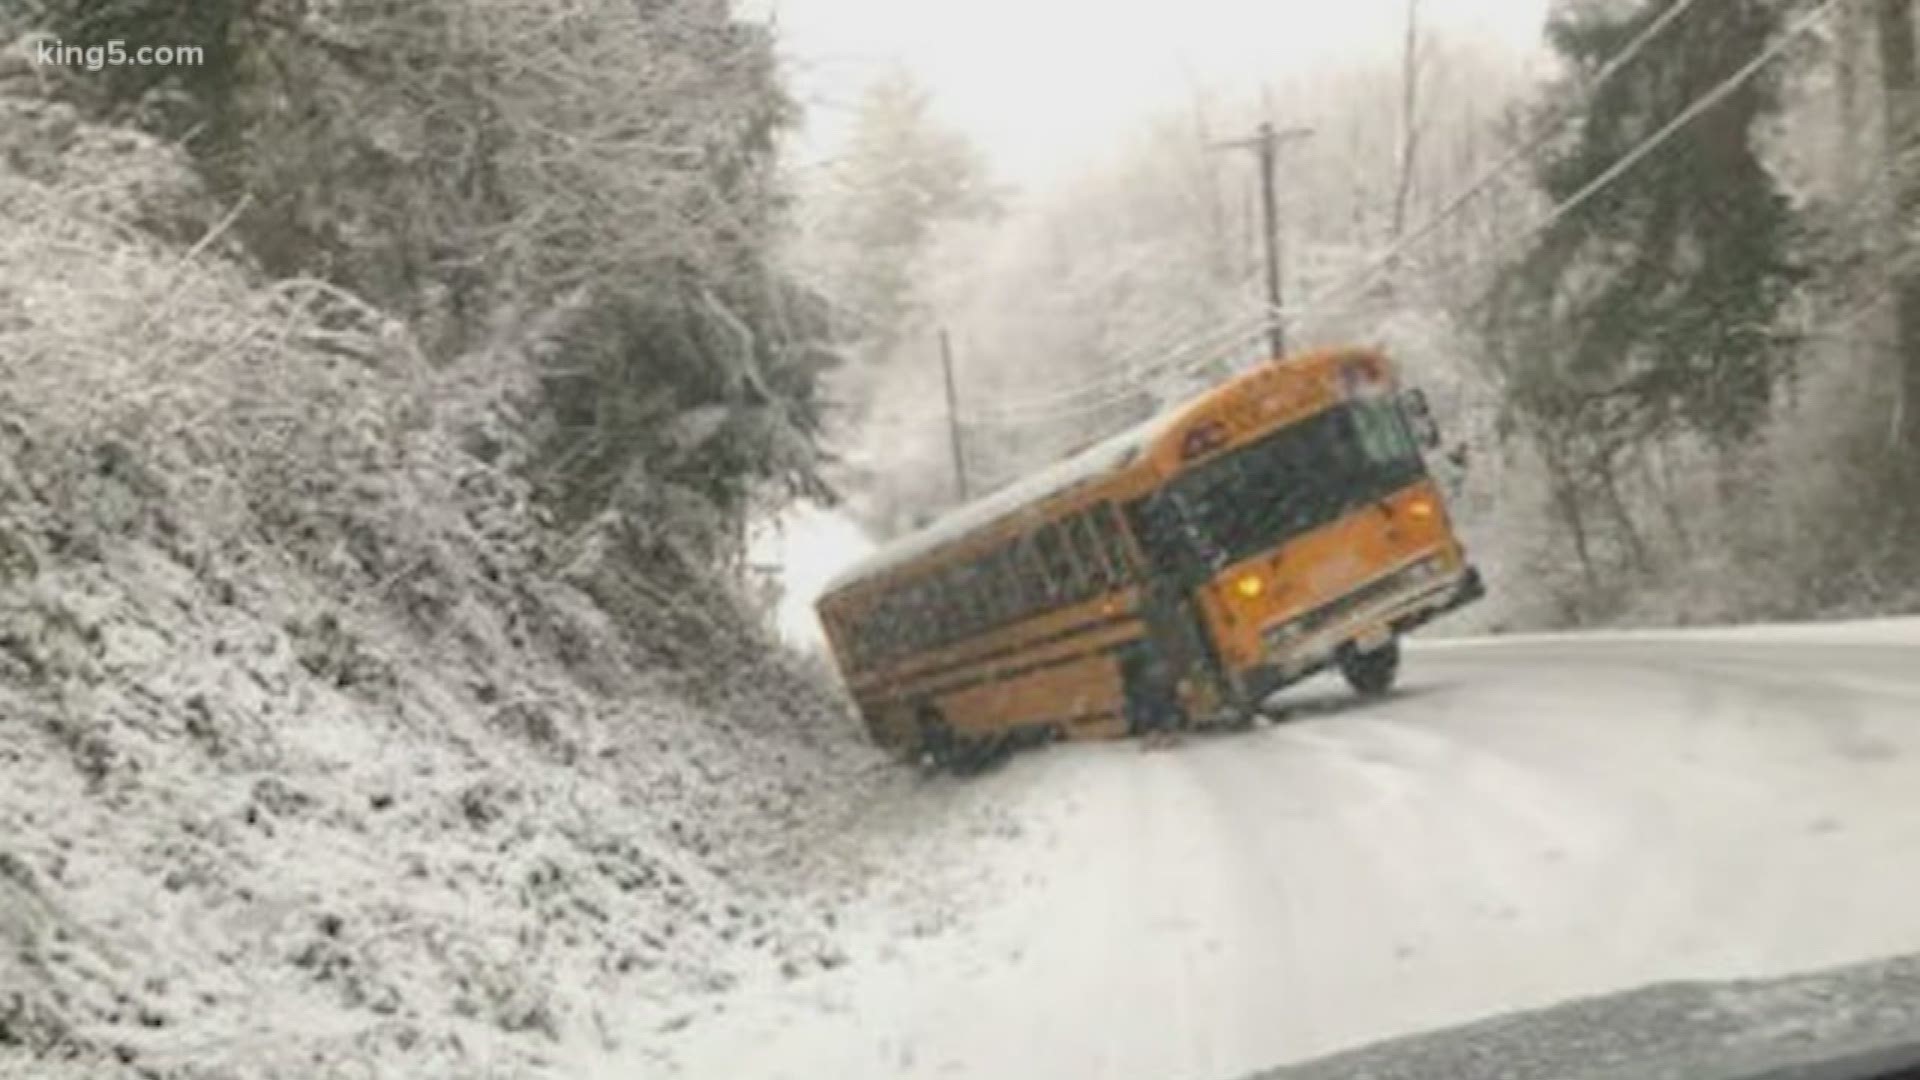 Several school districts faced a tough call this morning, whether to delay classes because of an ill-timed snowstorm. Images show buses from Issaquah and Northshore sliding on snowy roads. KING 5's Michael Crowe has the details.